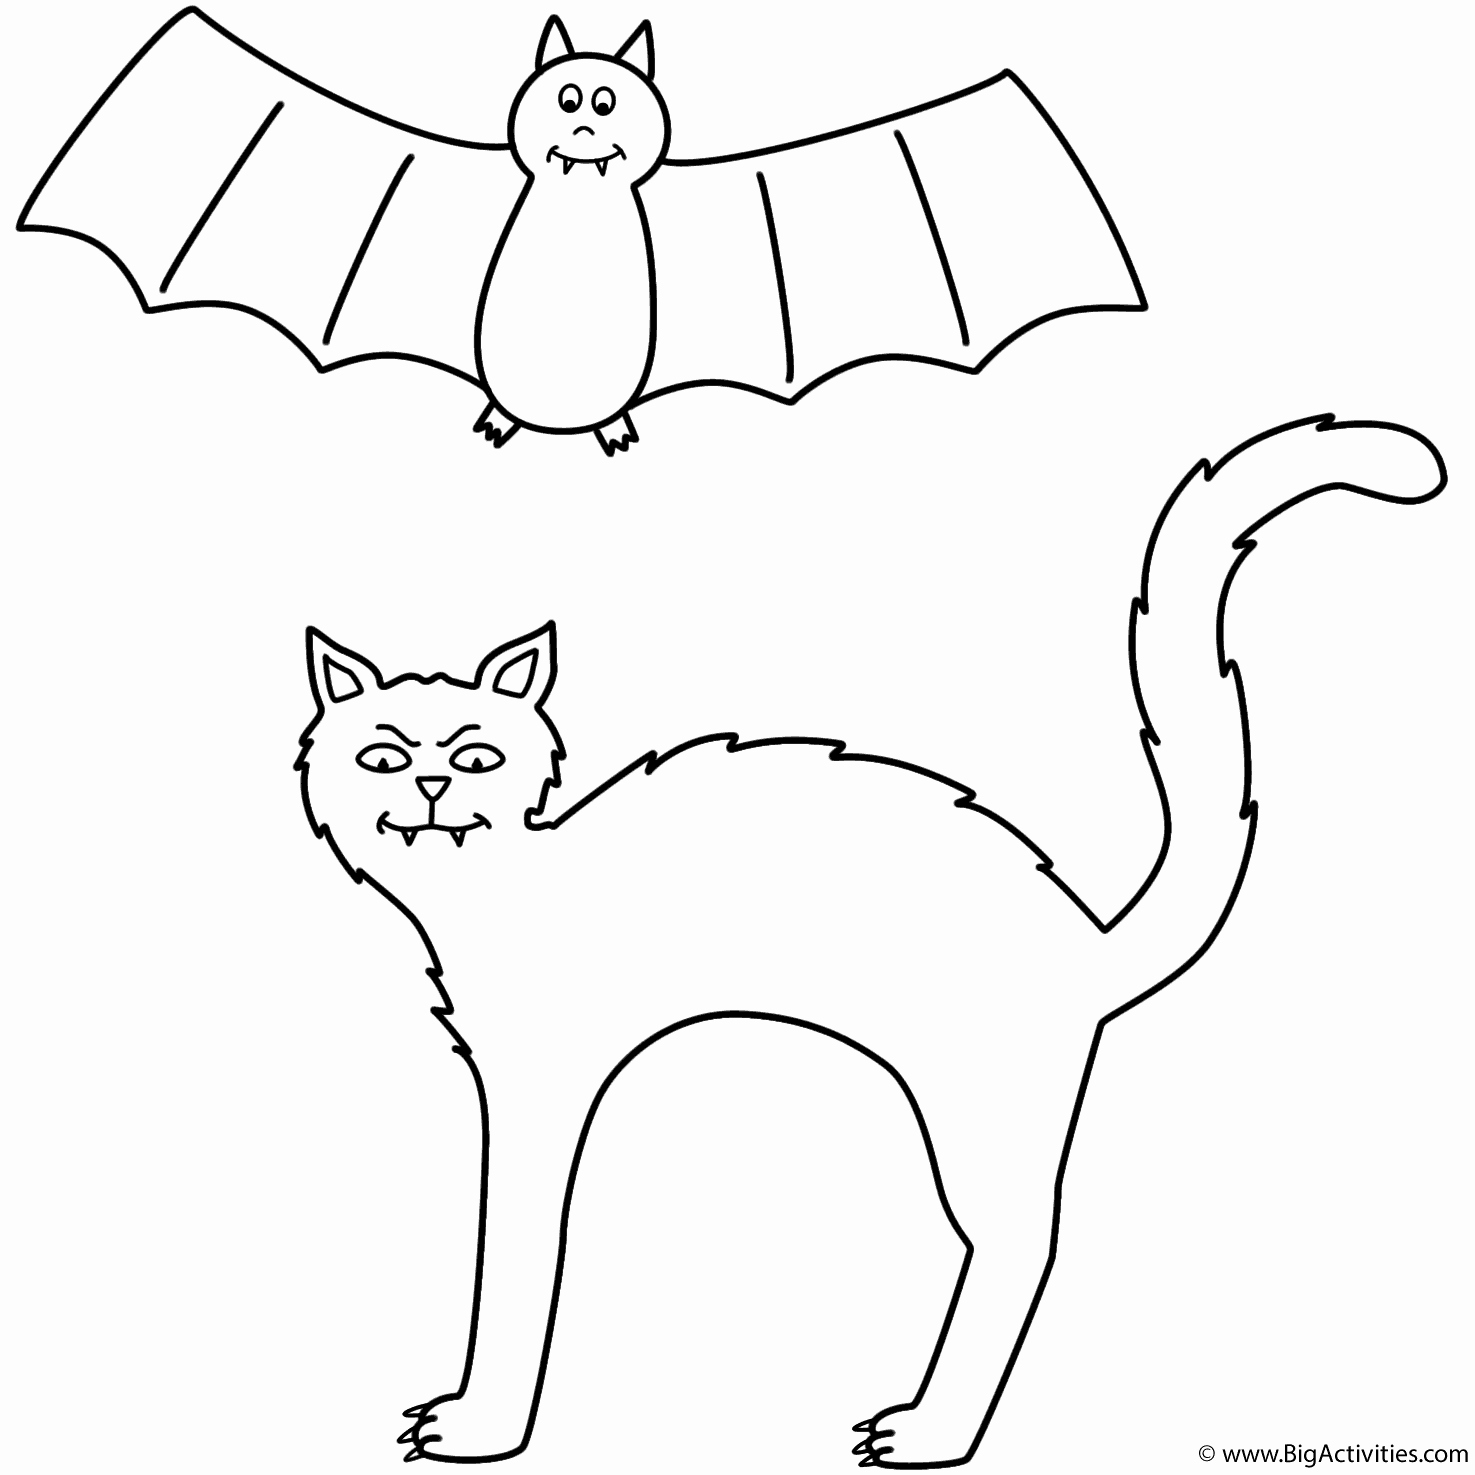 Splat The Cat Coloring Pages at GetColorings.com | Free ...